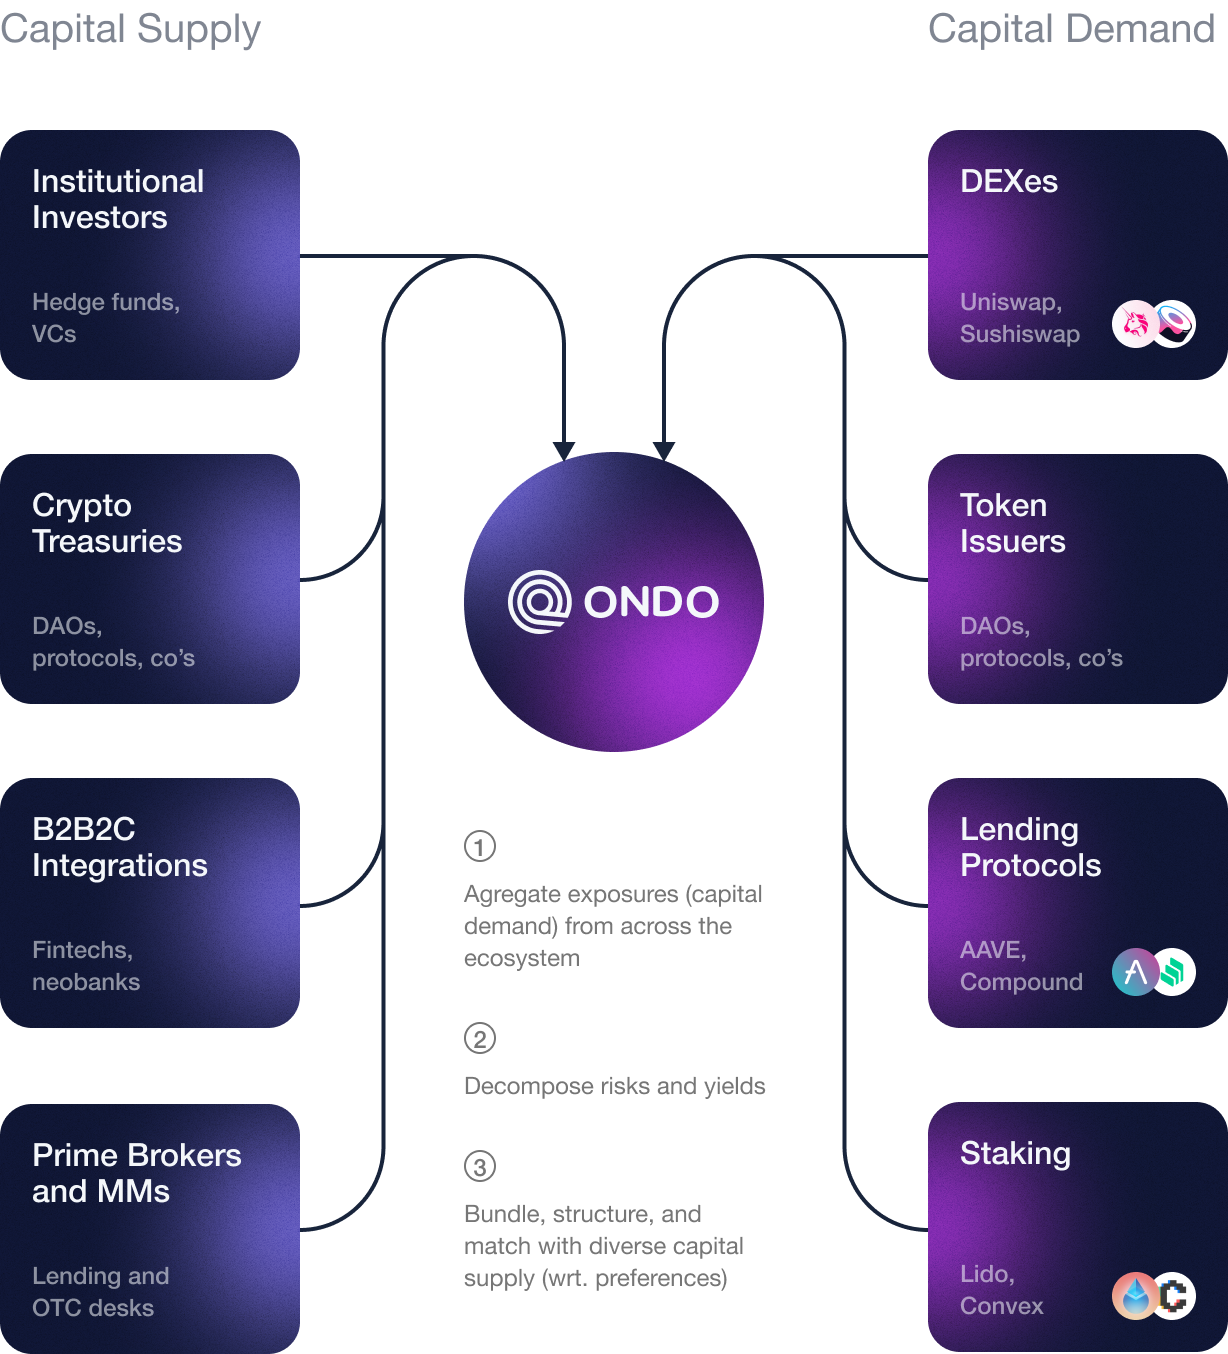 A graphic depicting Ondo's place in the DeFi ecosystem